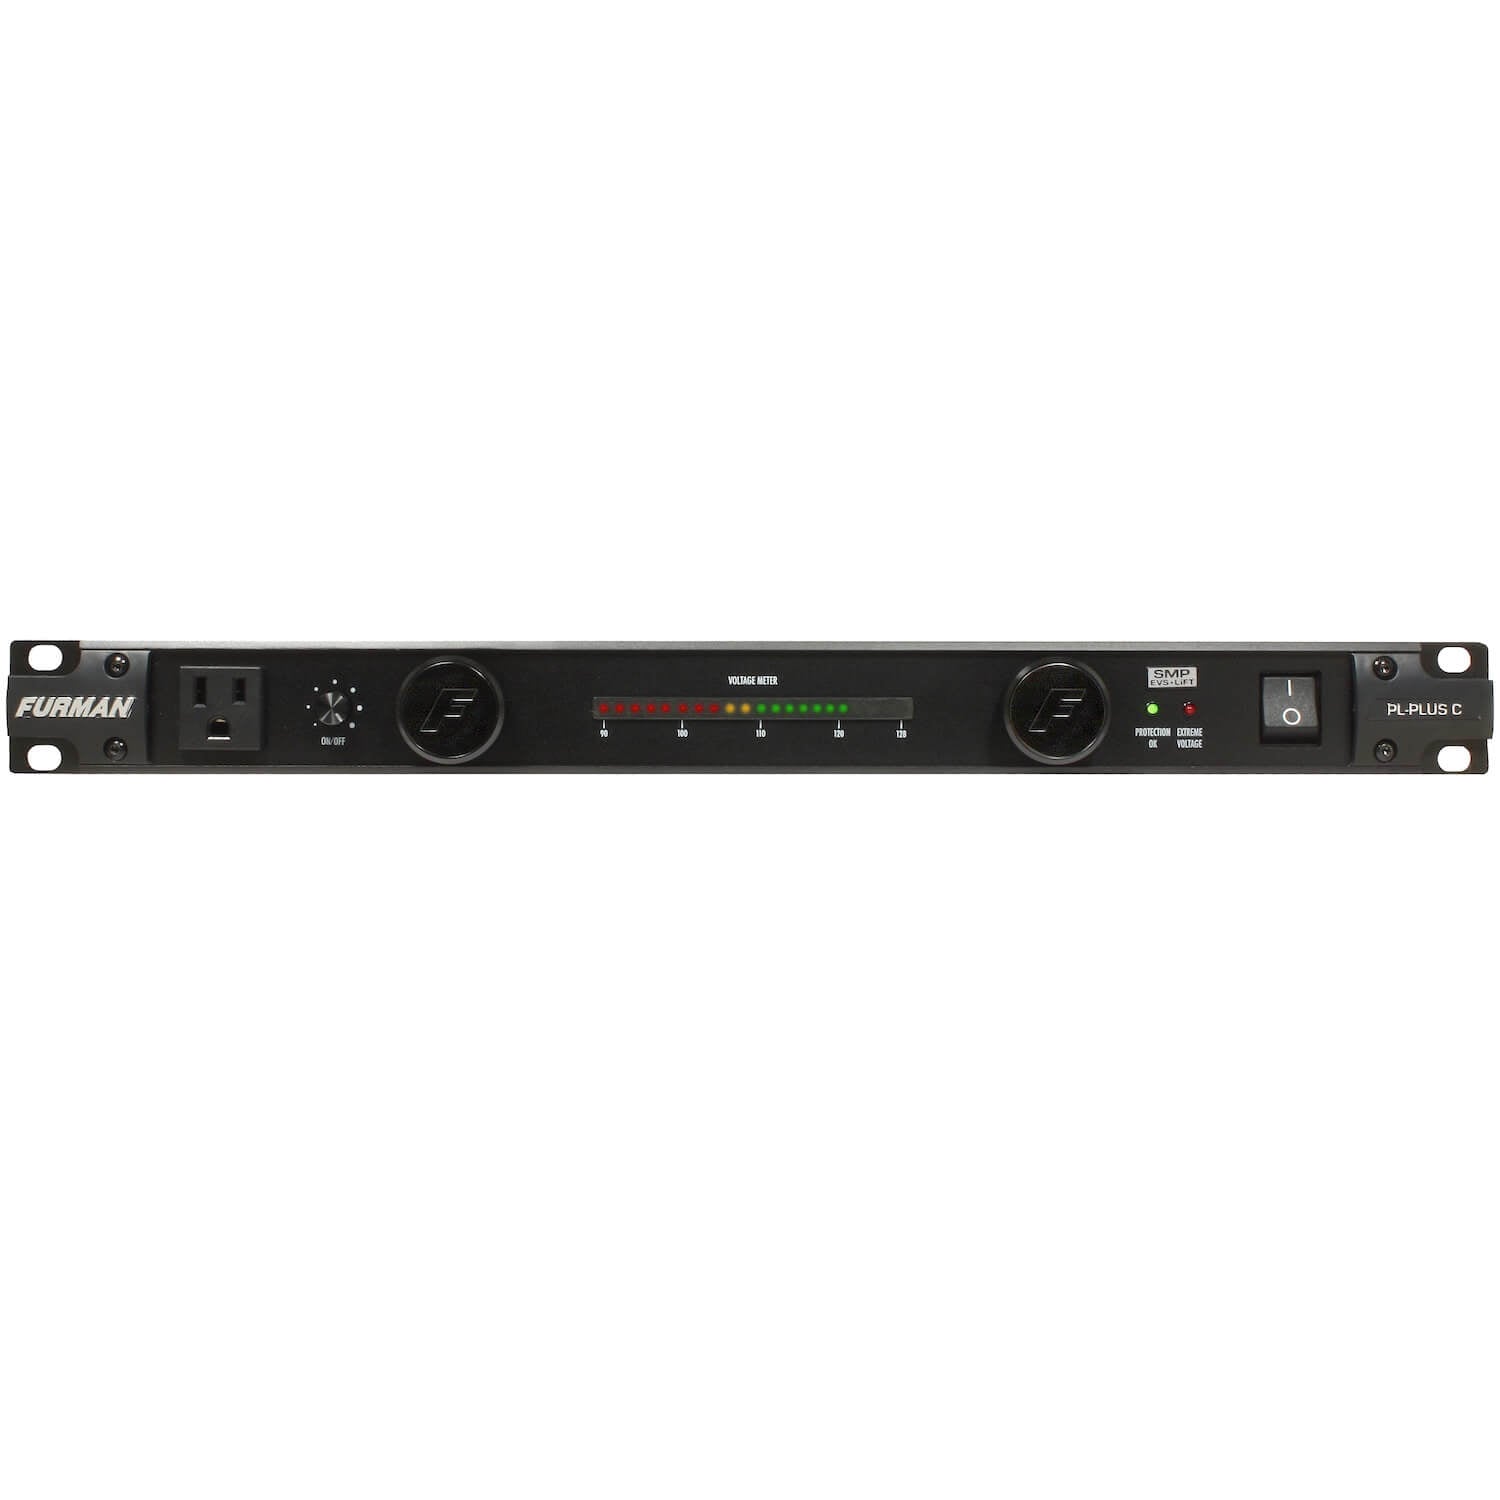 Furman PL-PLUS C - 15A Power Conditioner with Lights and Voltmeter